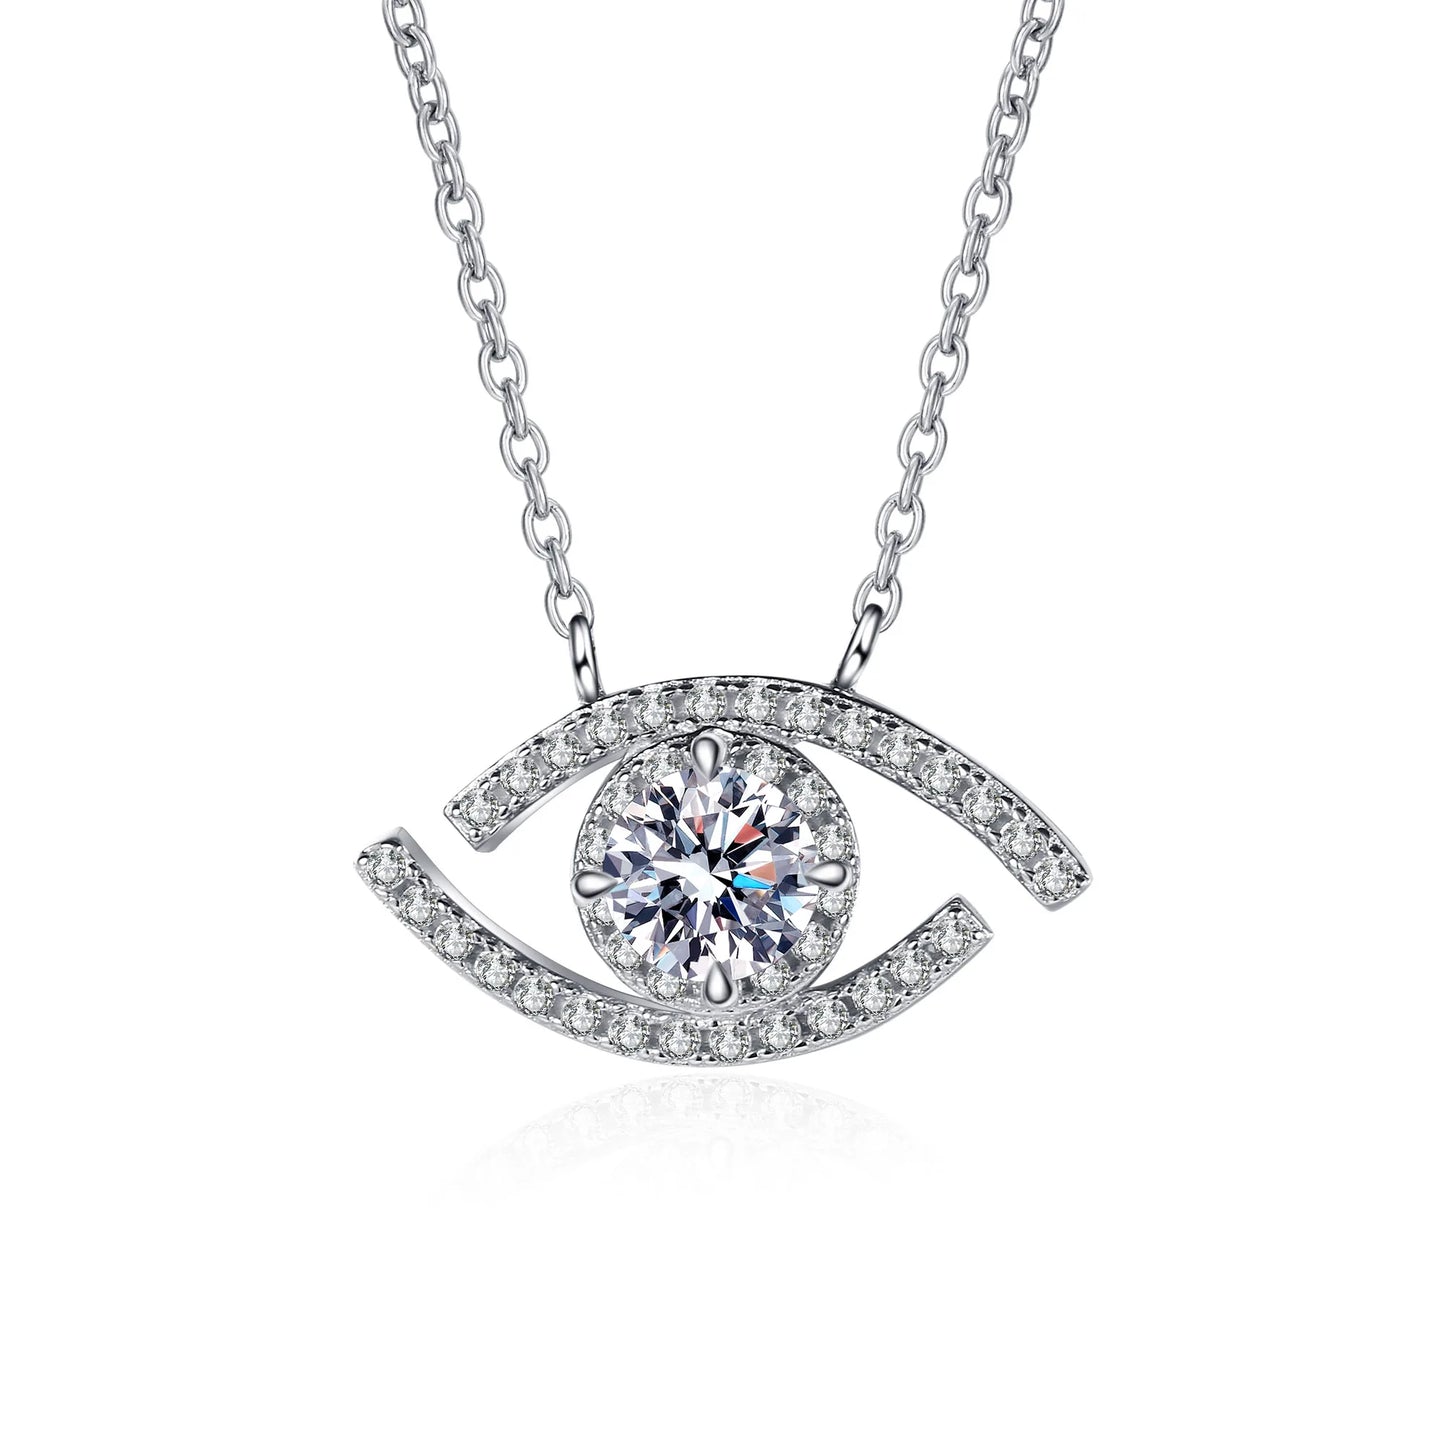 0.5ct, 1ct Round Cut Moissanite Asymmetric Evil Eye/Turkish Eye Pendant Necklace in Platinum Plated 925 Silver